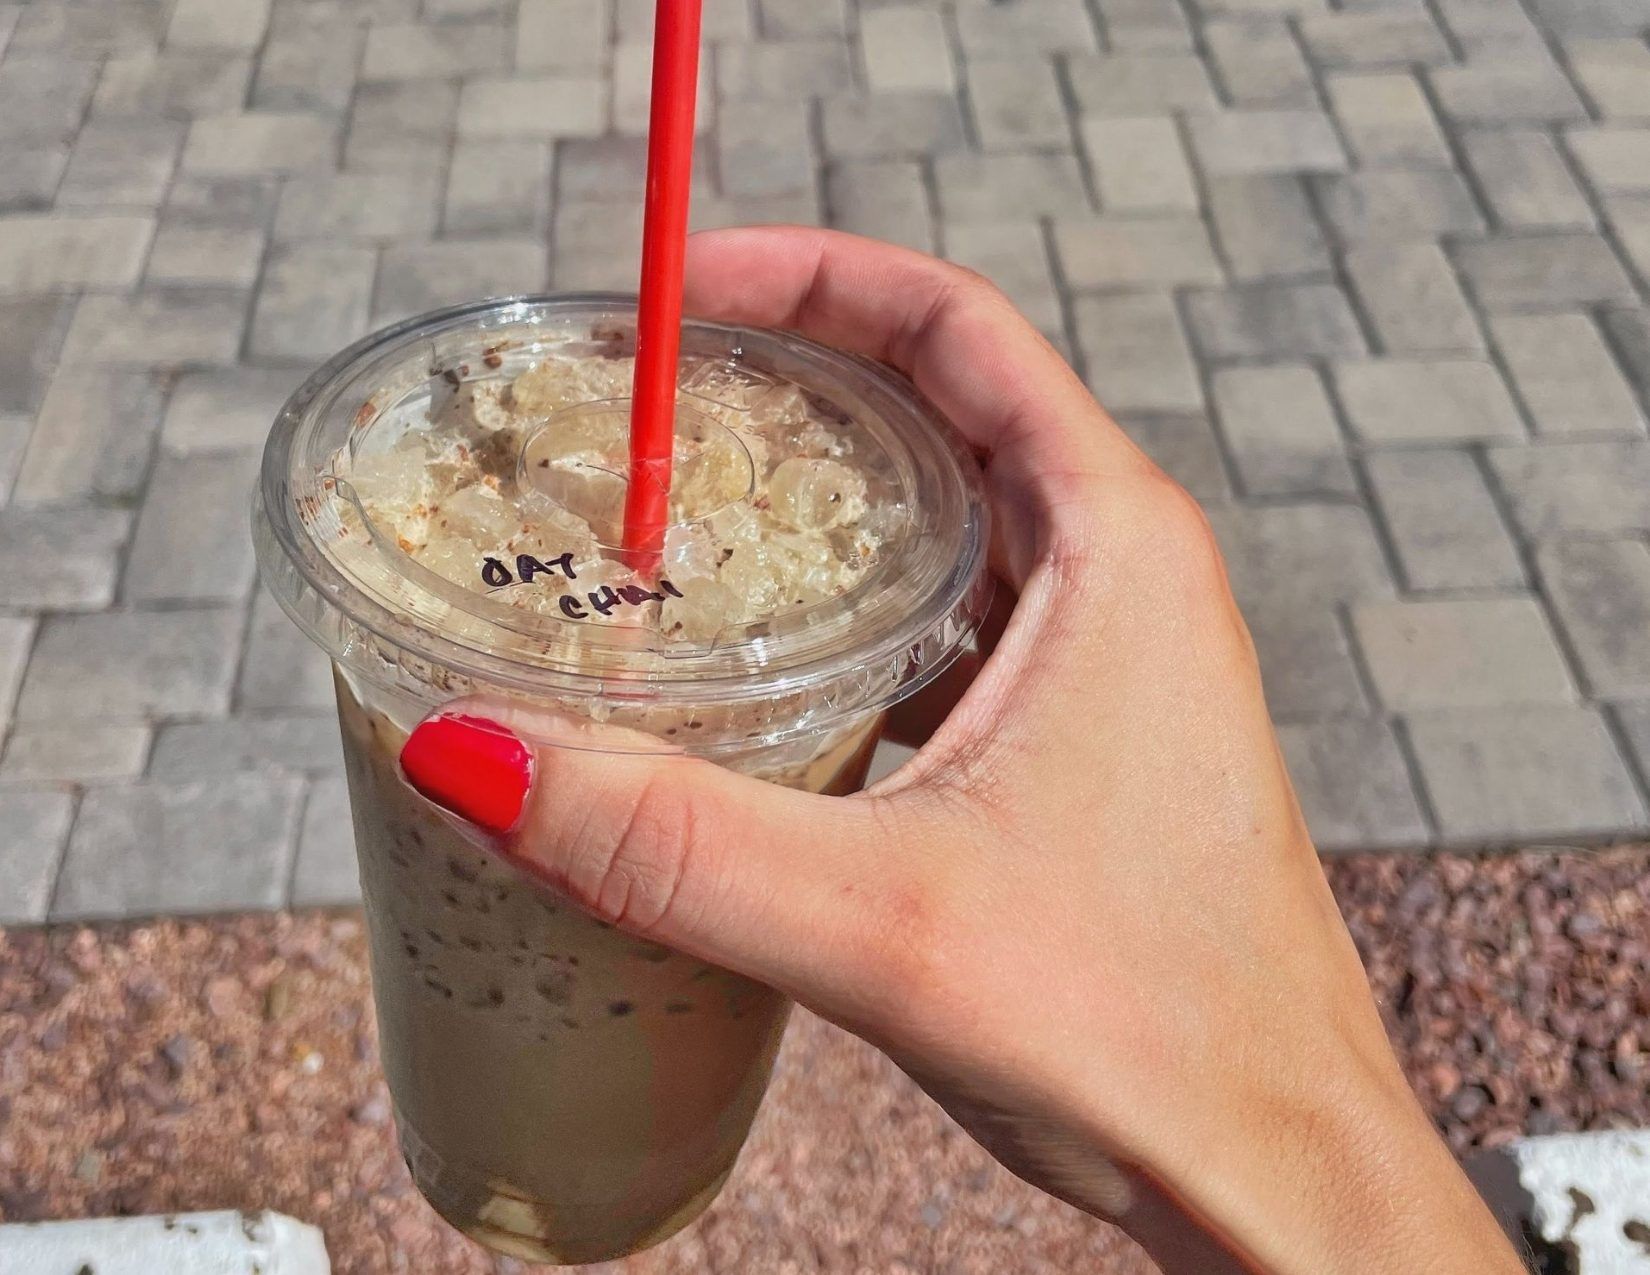 A hand holding an iced chai latte from a coffee shop in Strawberry, Arizona